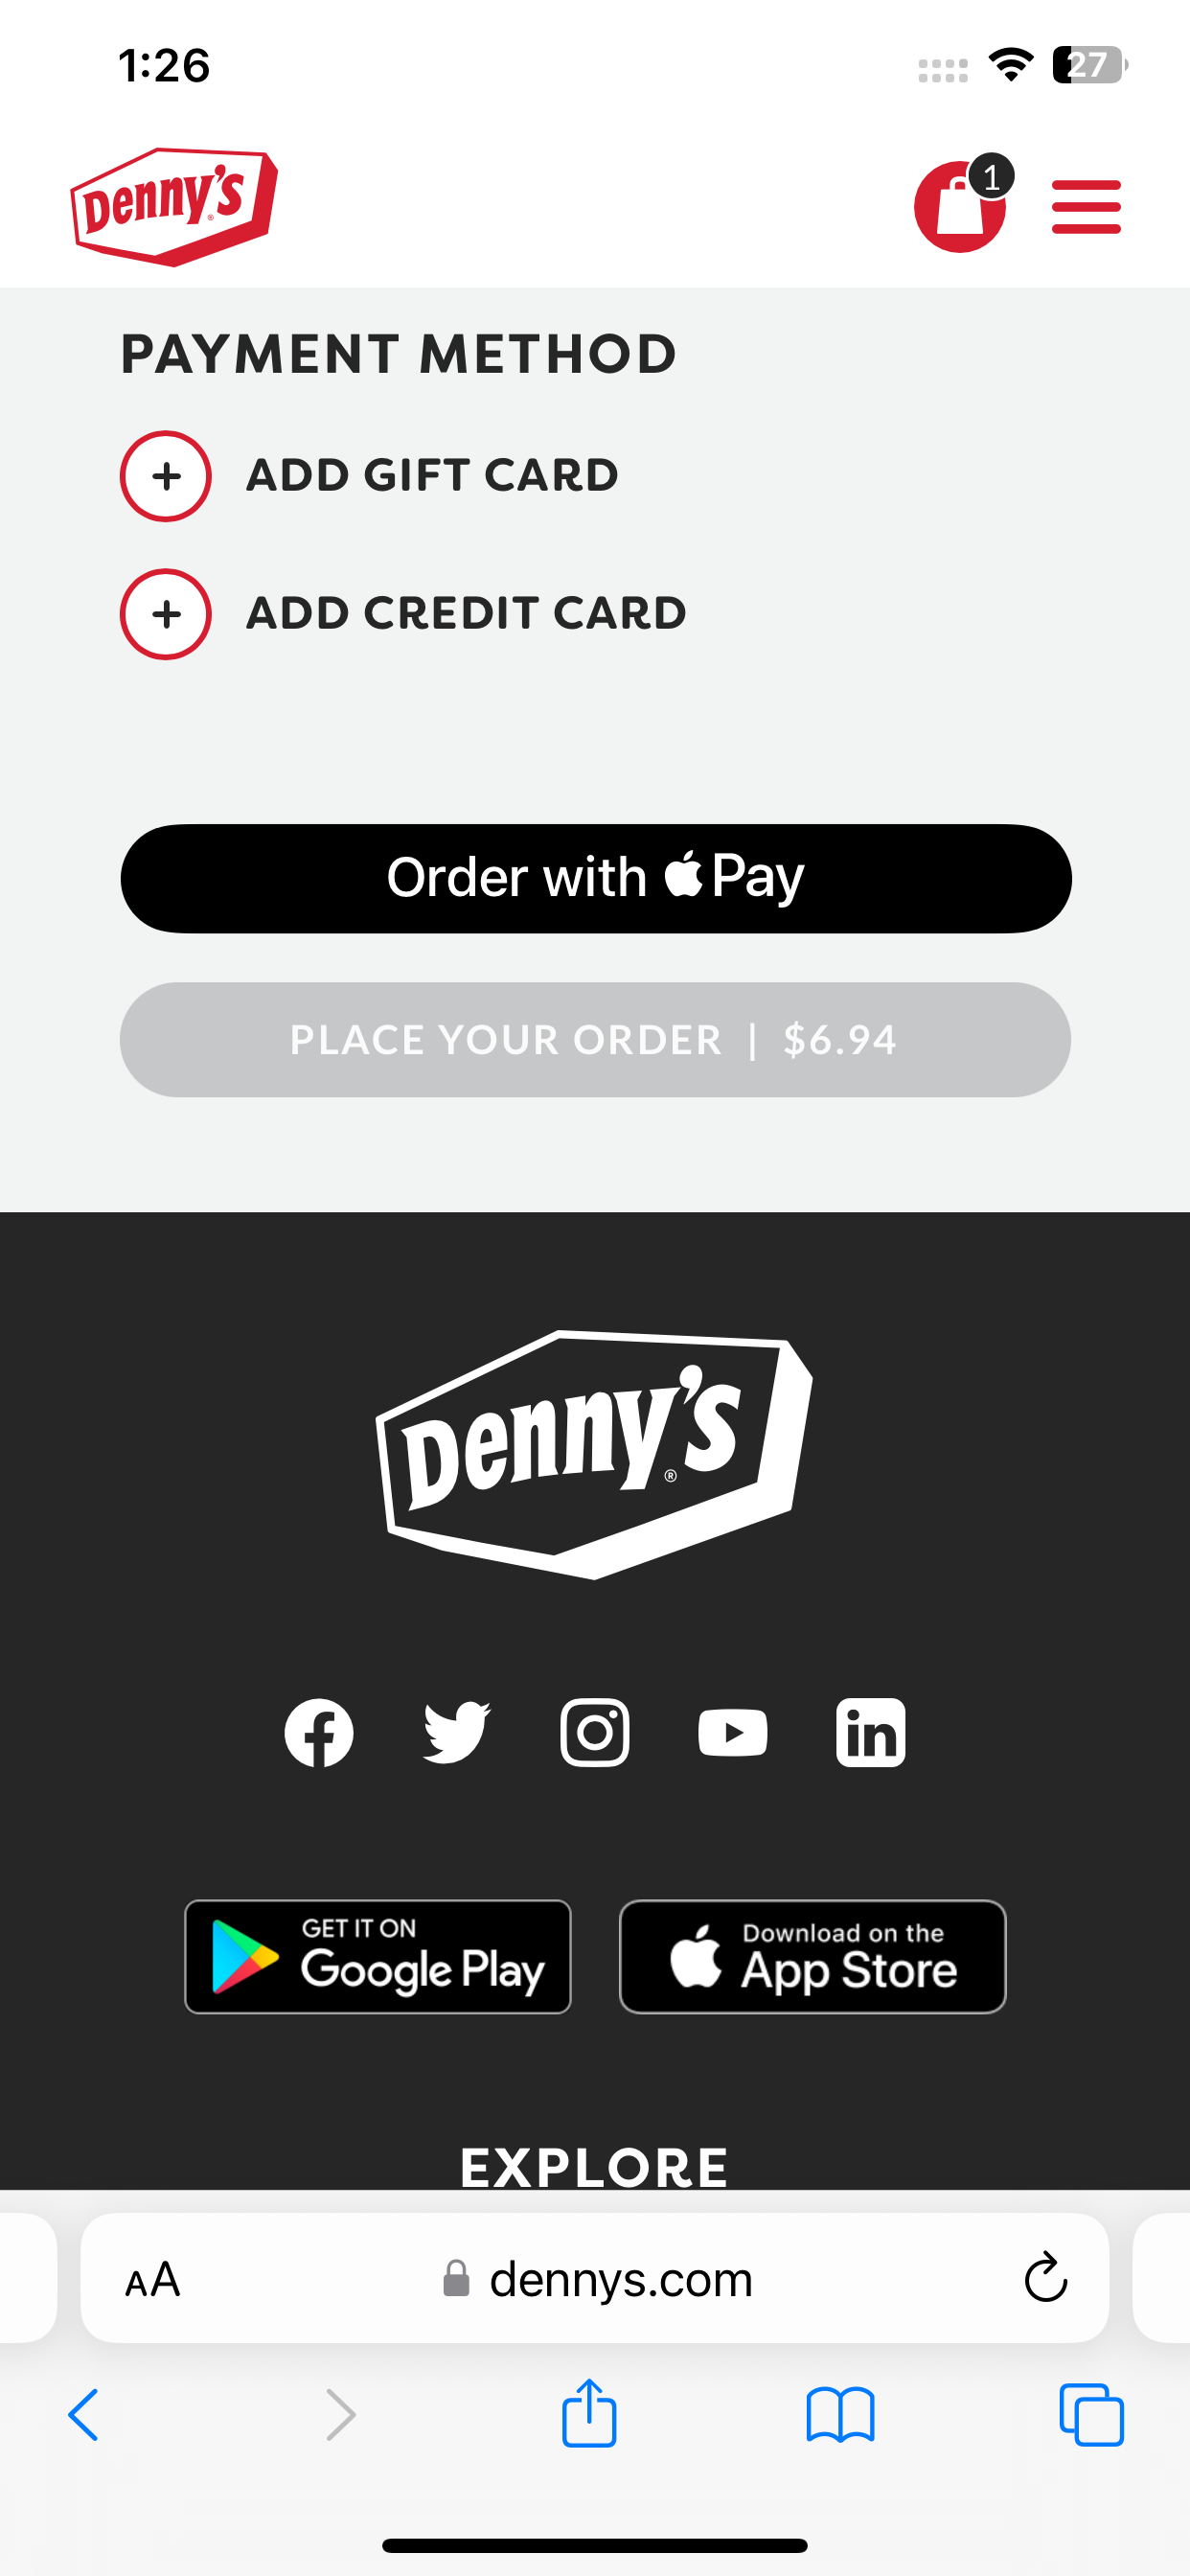 Denny's accepts Apple Pay on its website.